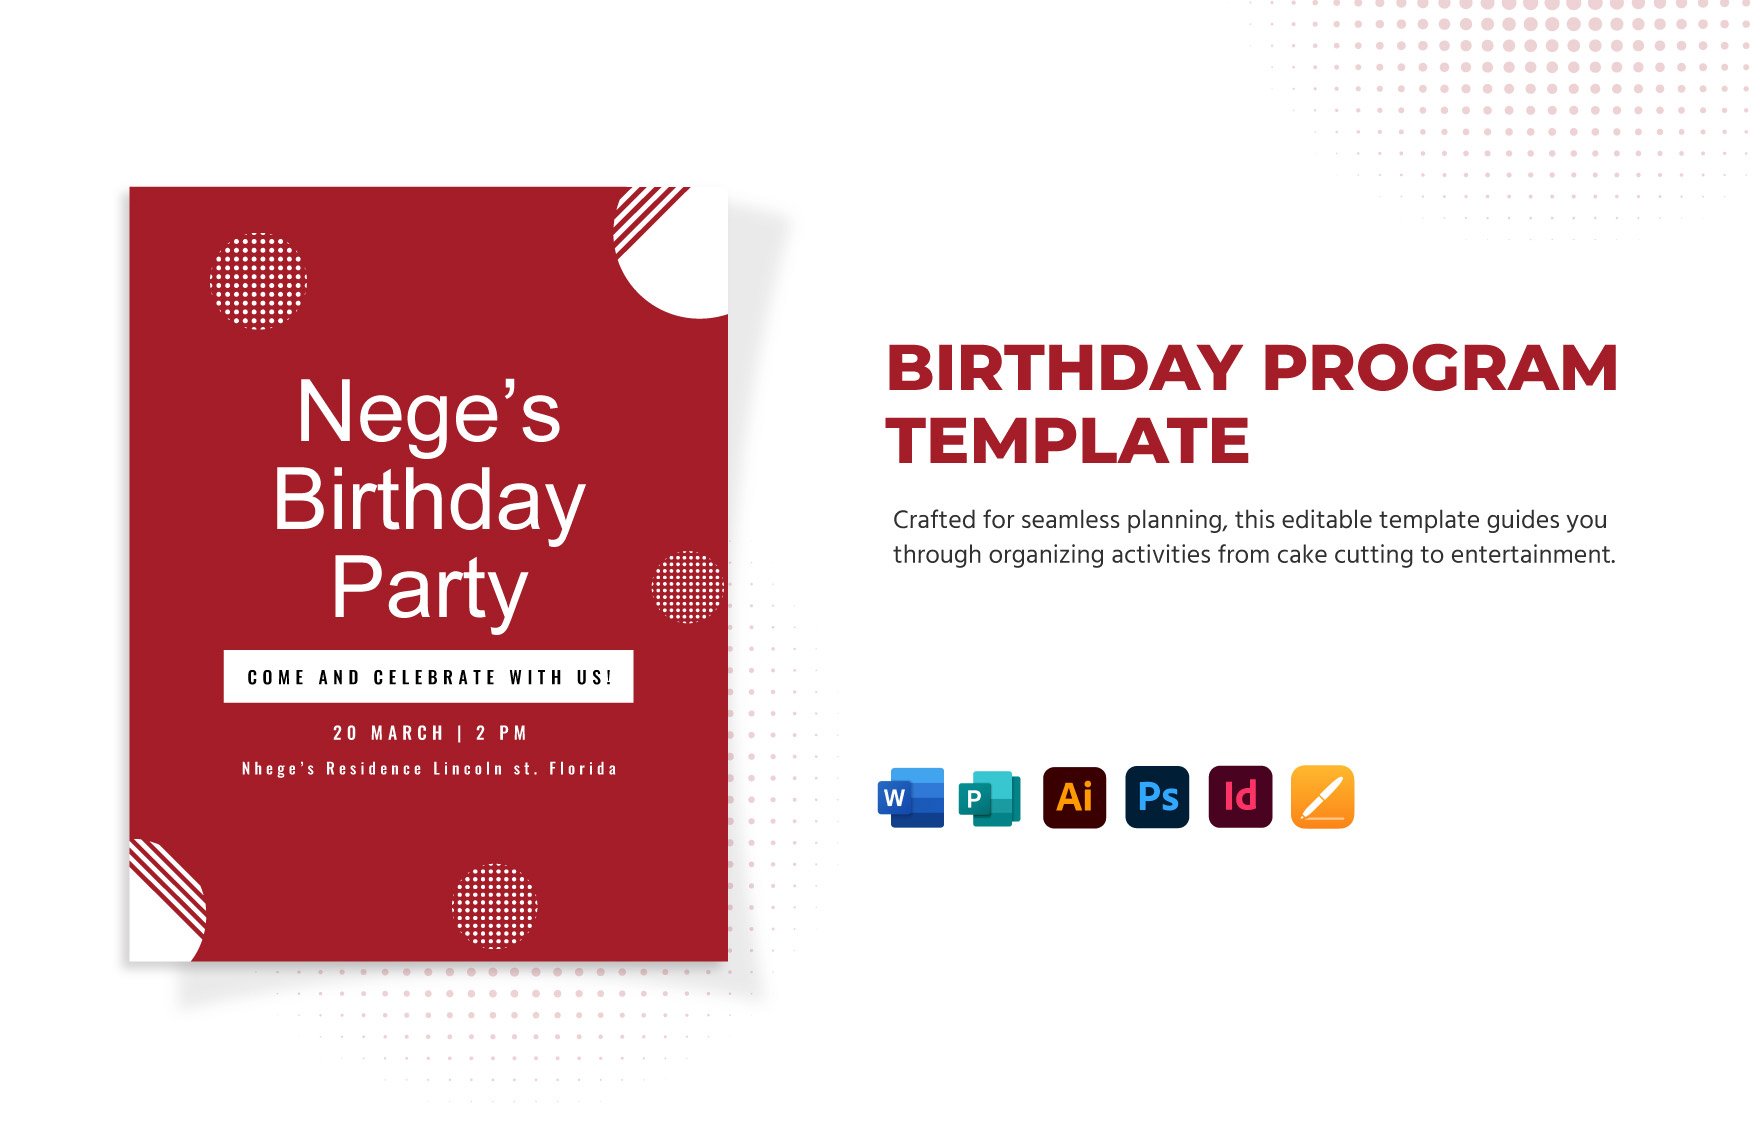 Birthday Program Template in Word, Illustrator, PSD, Apple Pages, Publisher, InDesign